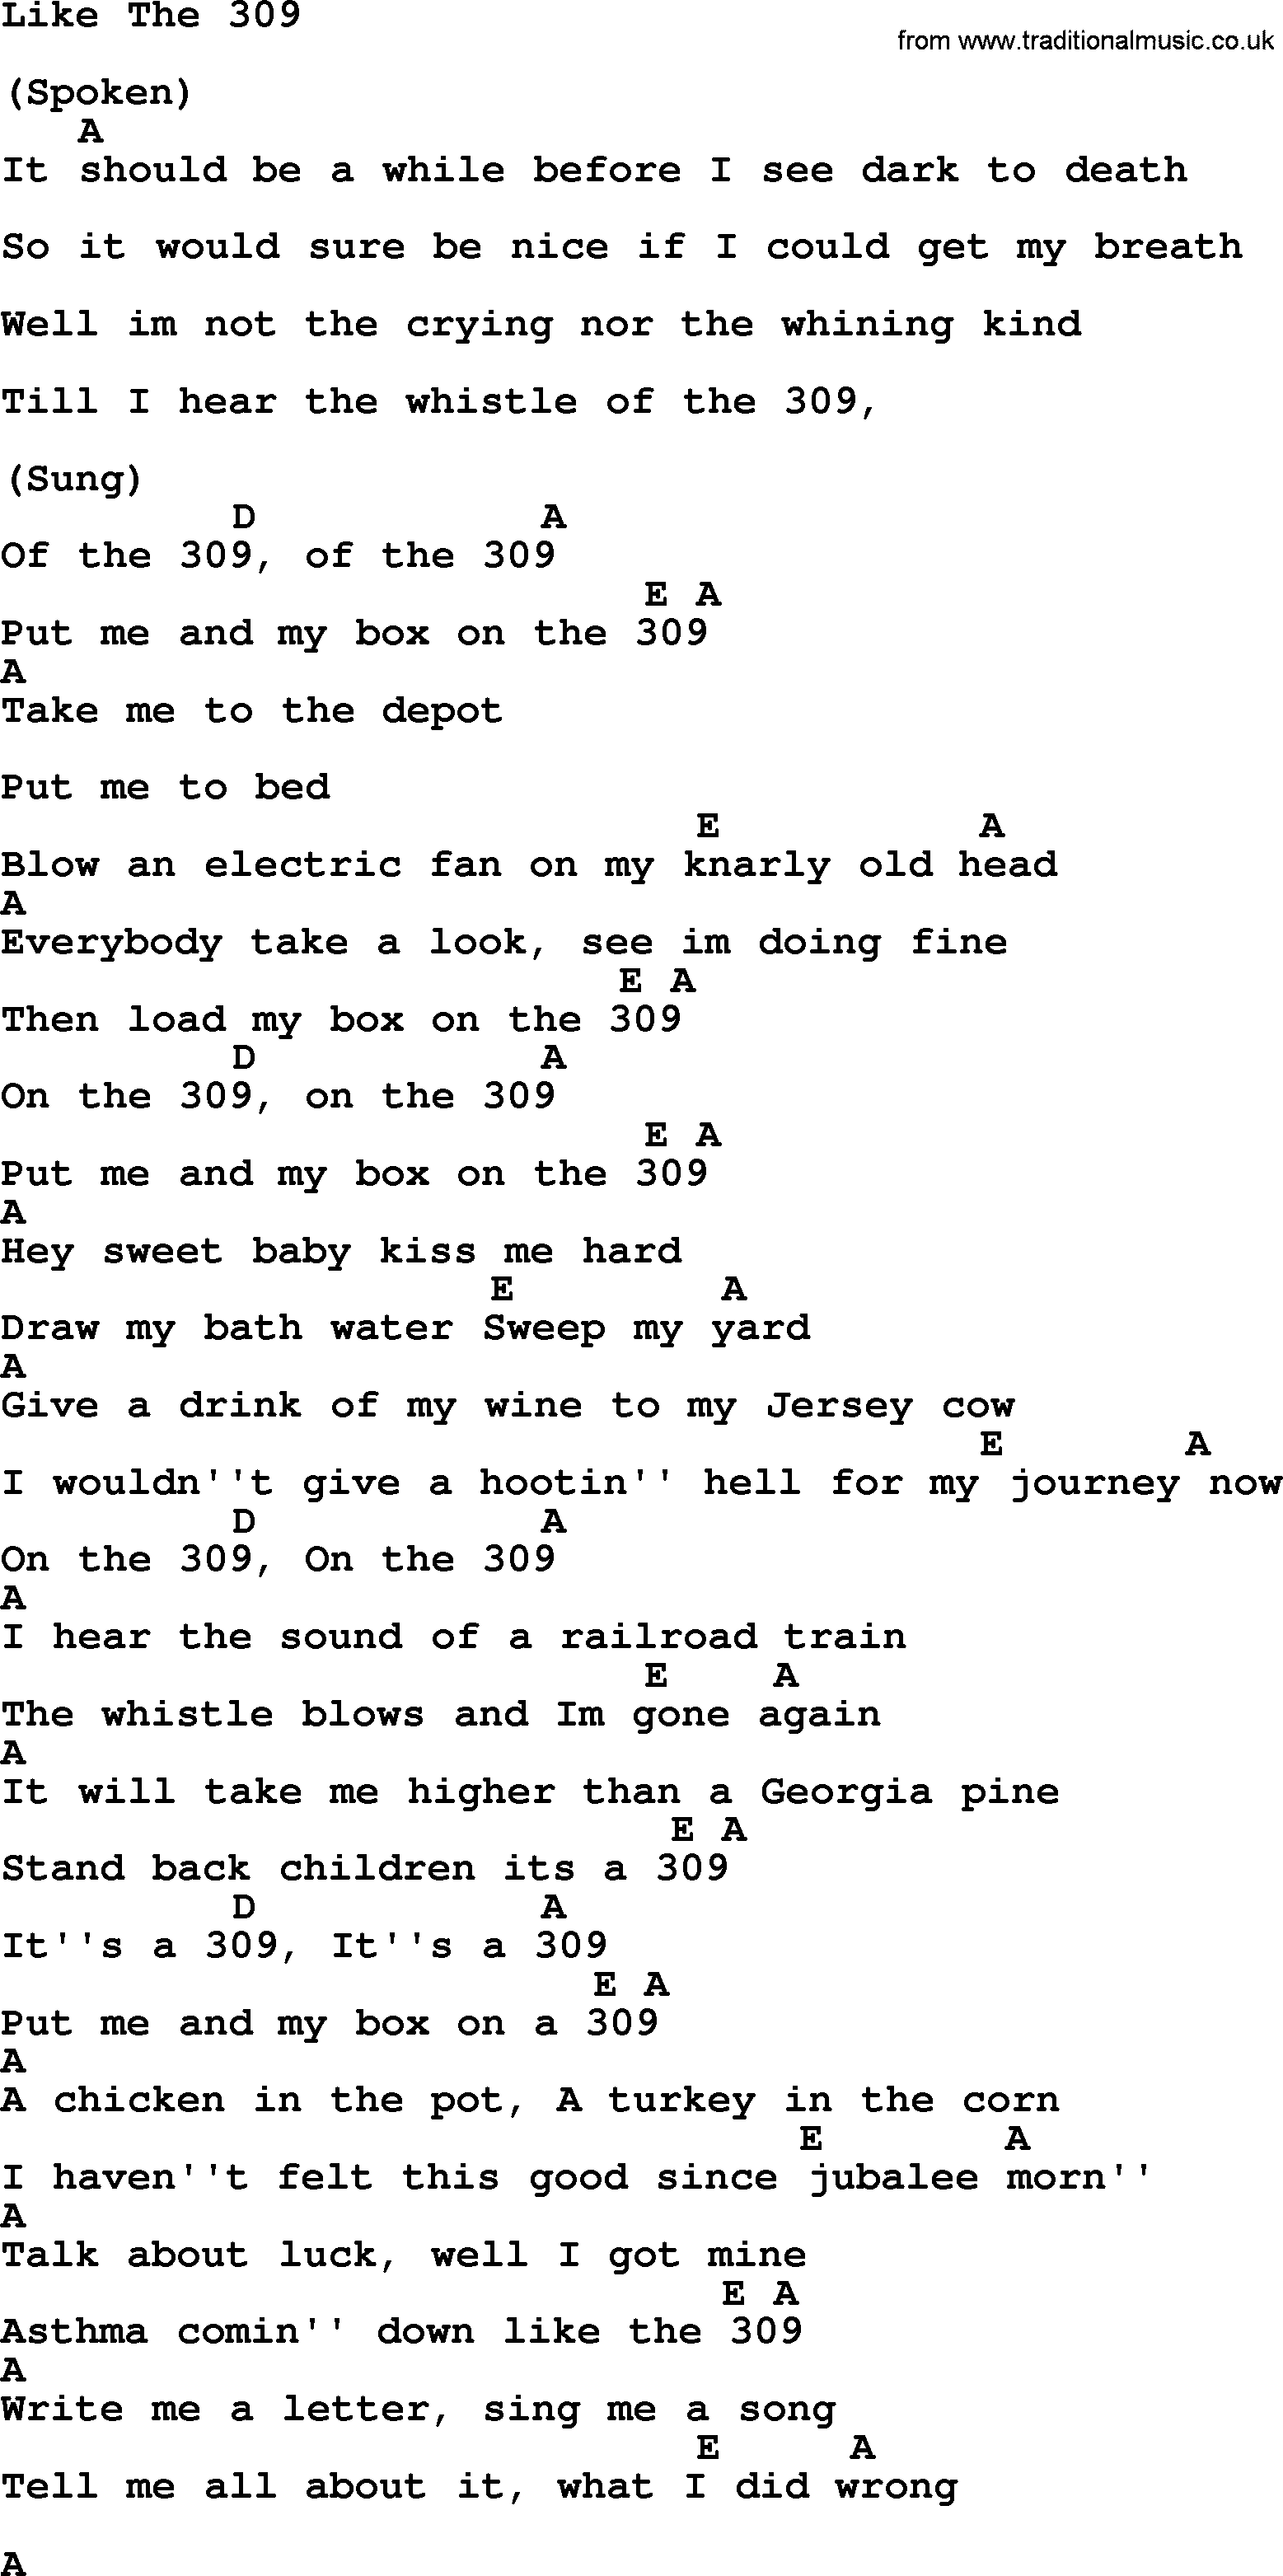 Johnny Cash song Like The 309, lyrics and chords